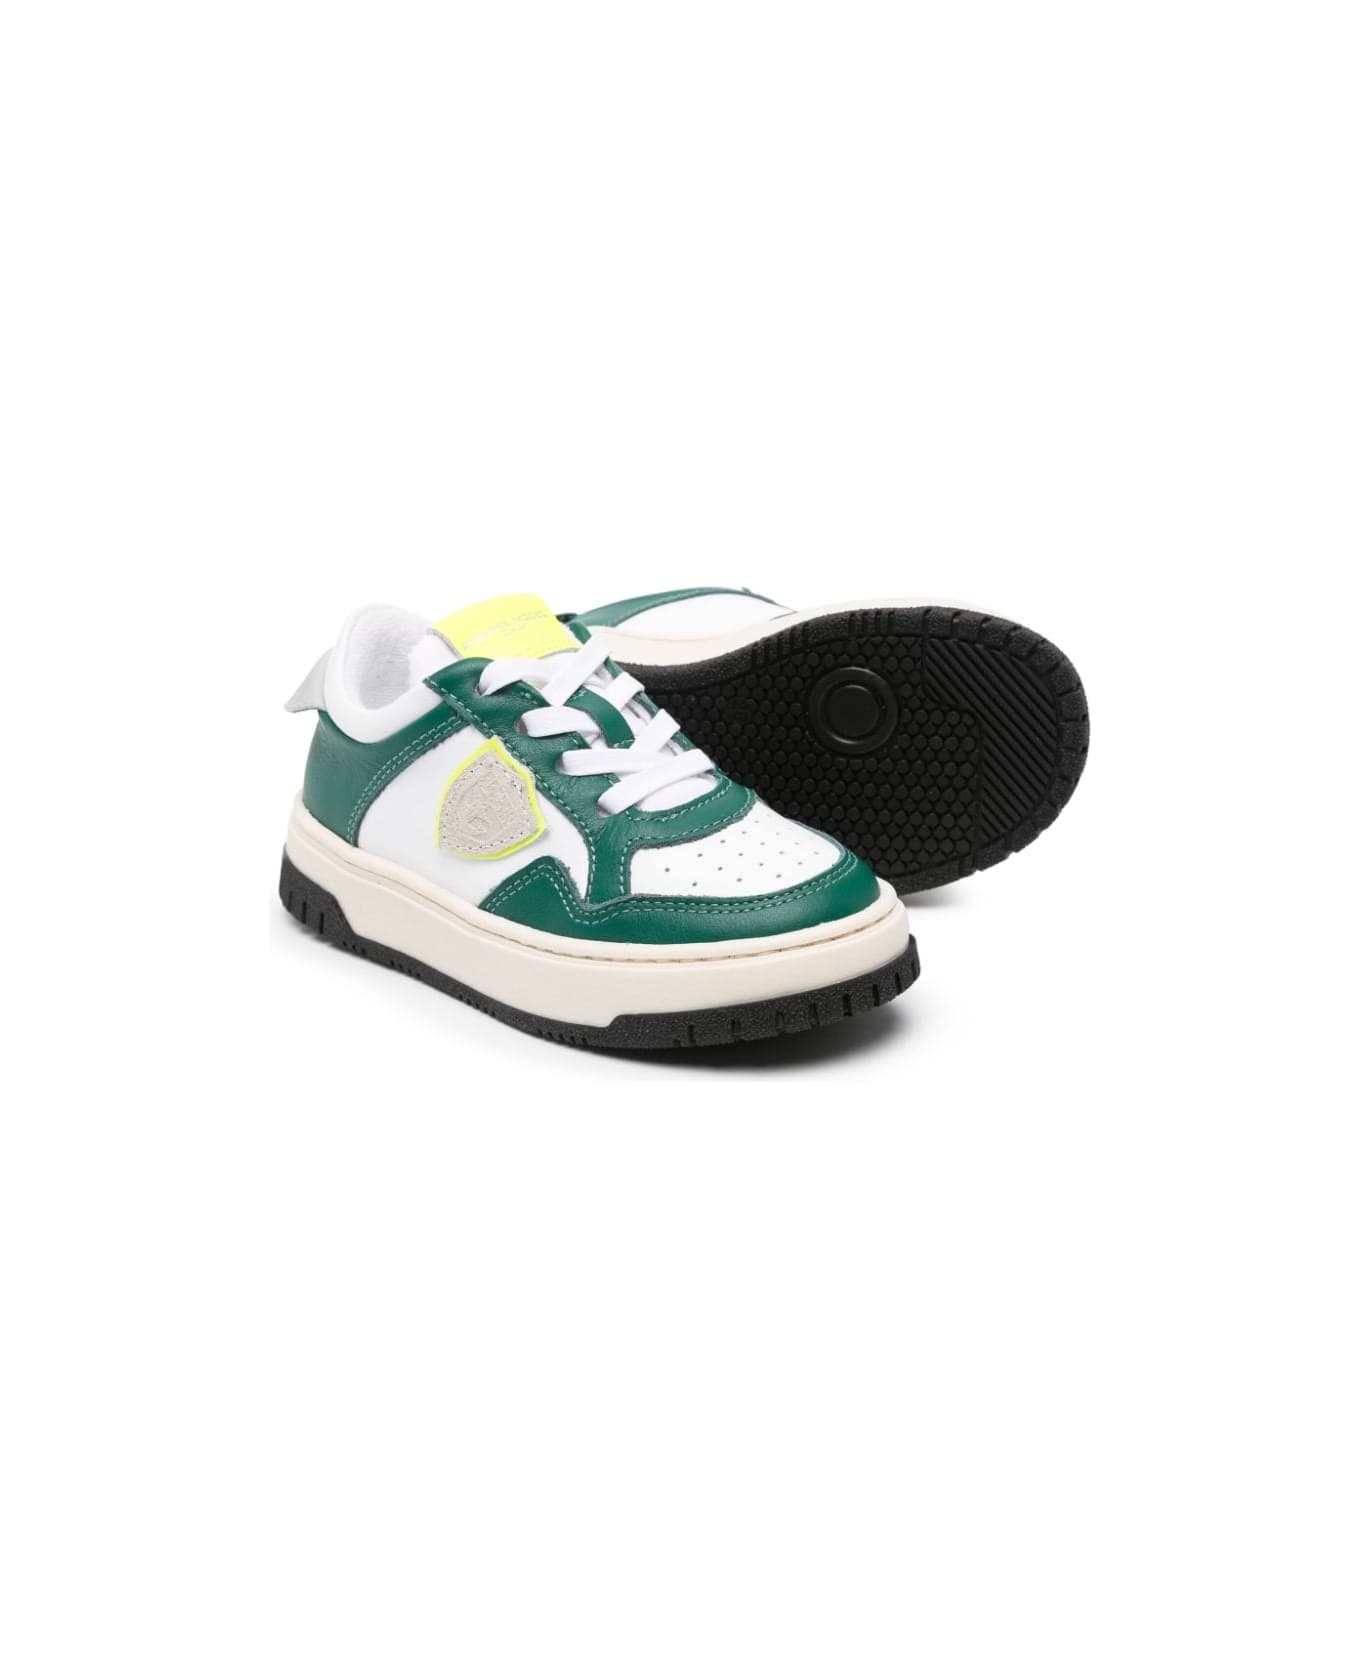 Philippe Model Sneakers With Application - Green